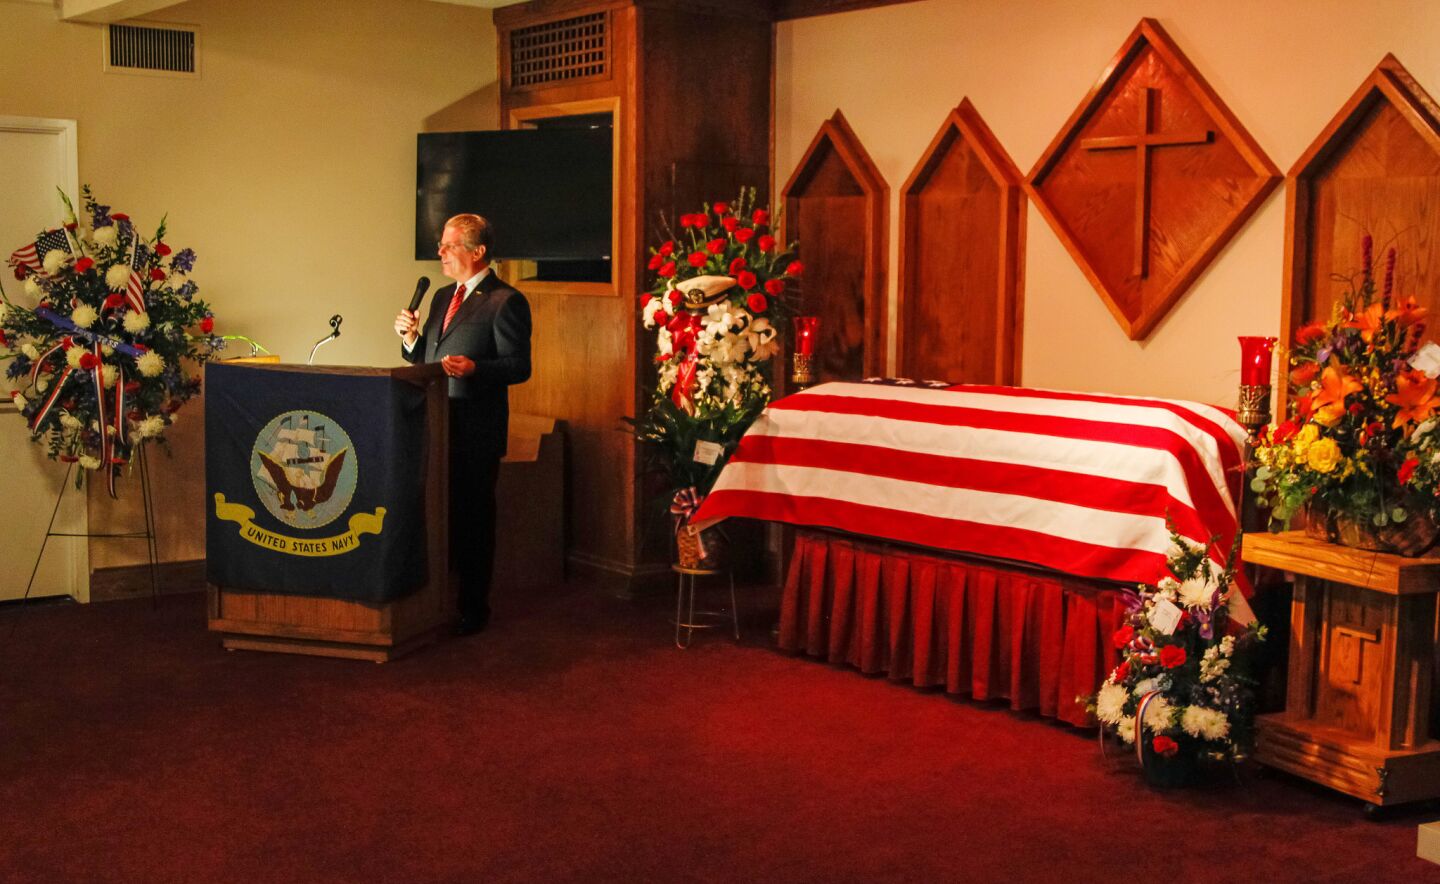 Mac McLaughlin, president and ceo of the USS Midway Museum, speaks during Rudy Matz's memorial service at the Poway Bernardo Mortuary.